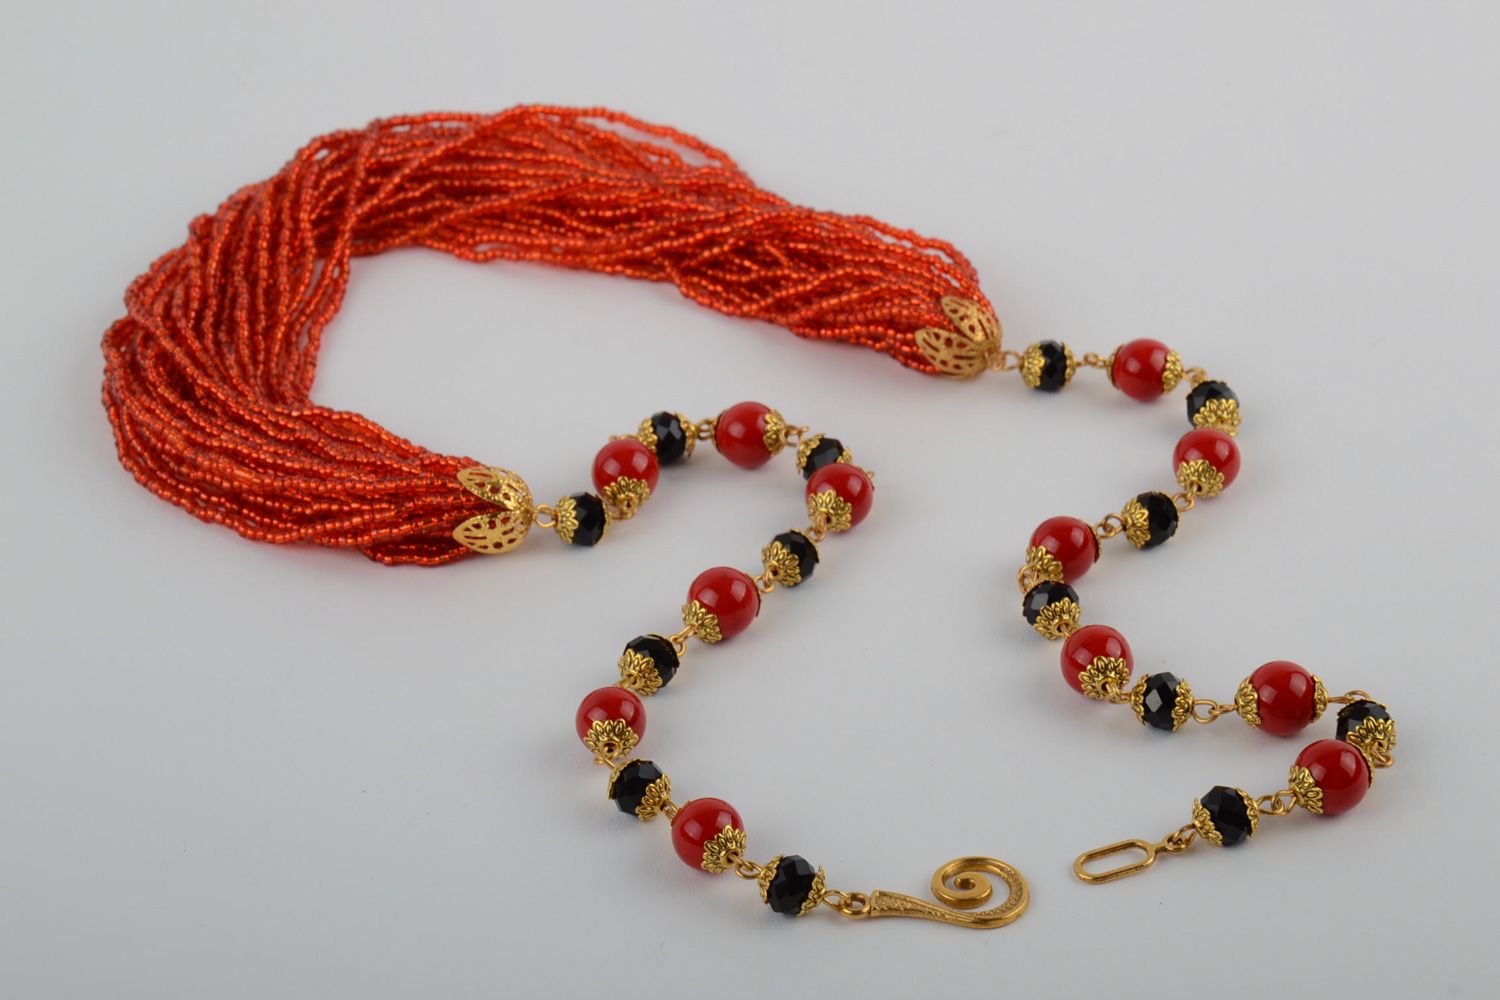 Handmade multi row necklace woven of Czech and wooden beads of red and black colors photo 2